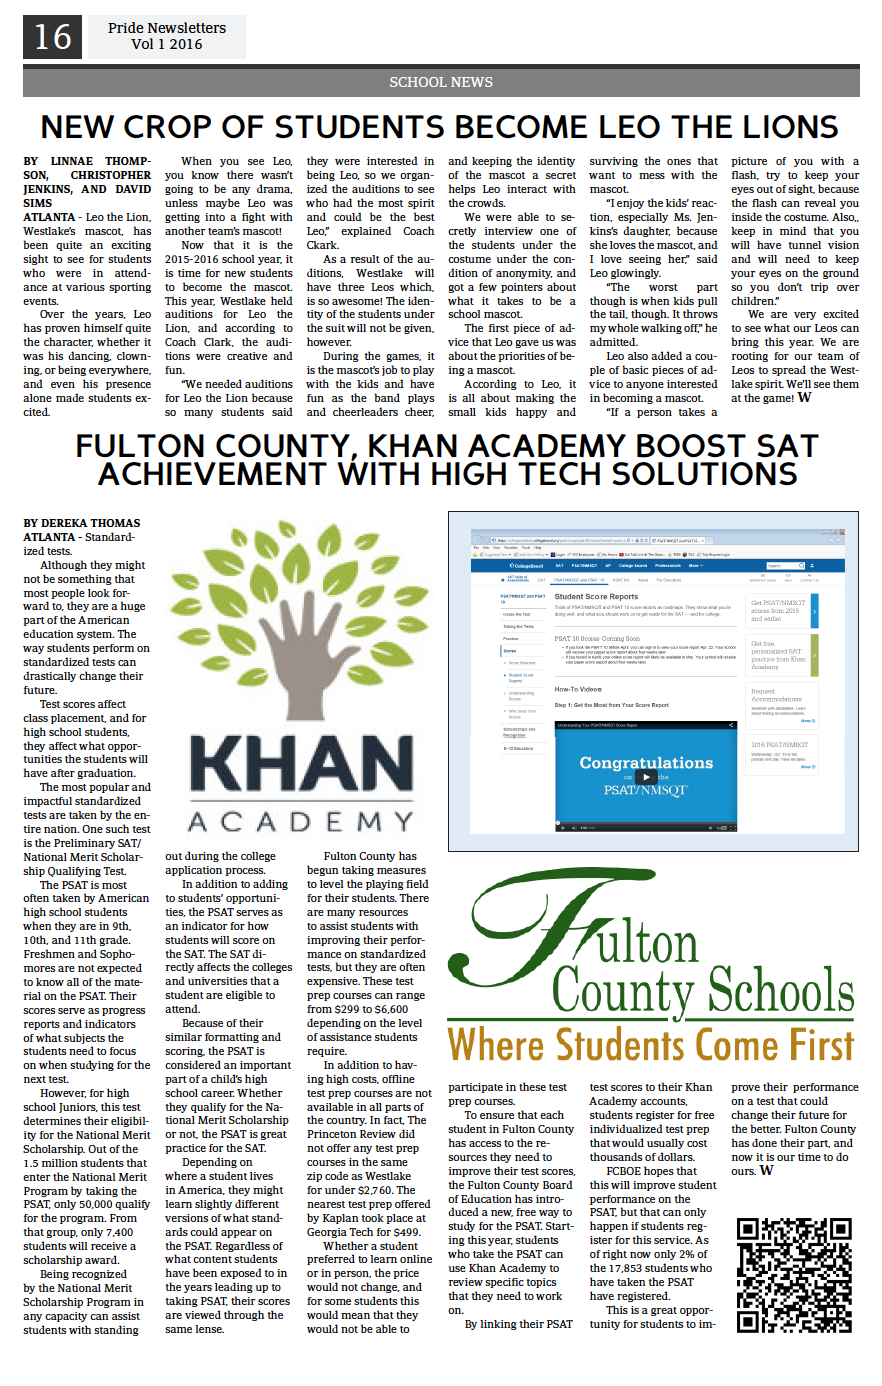 Newspaper Preview 016.png